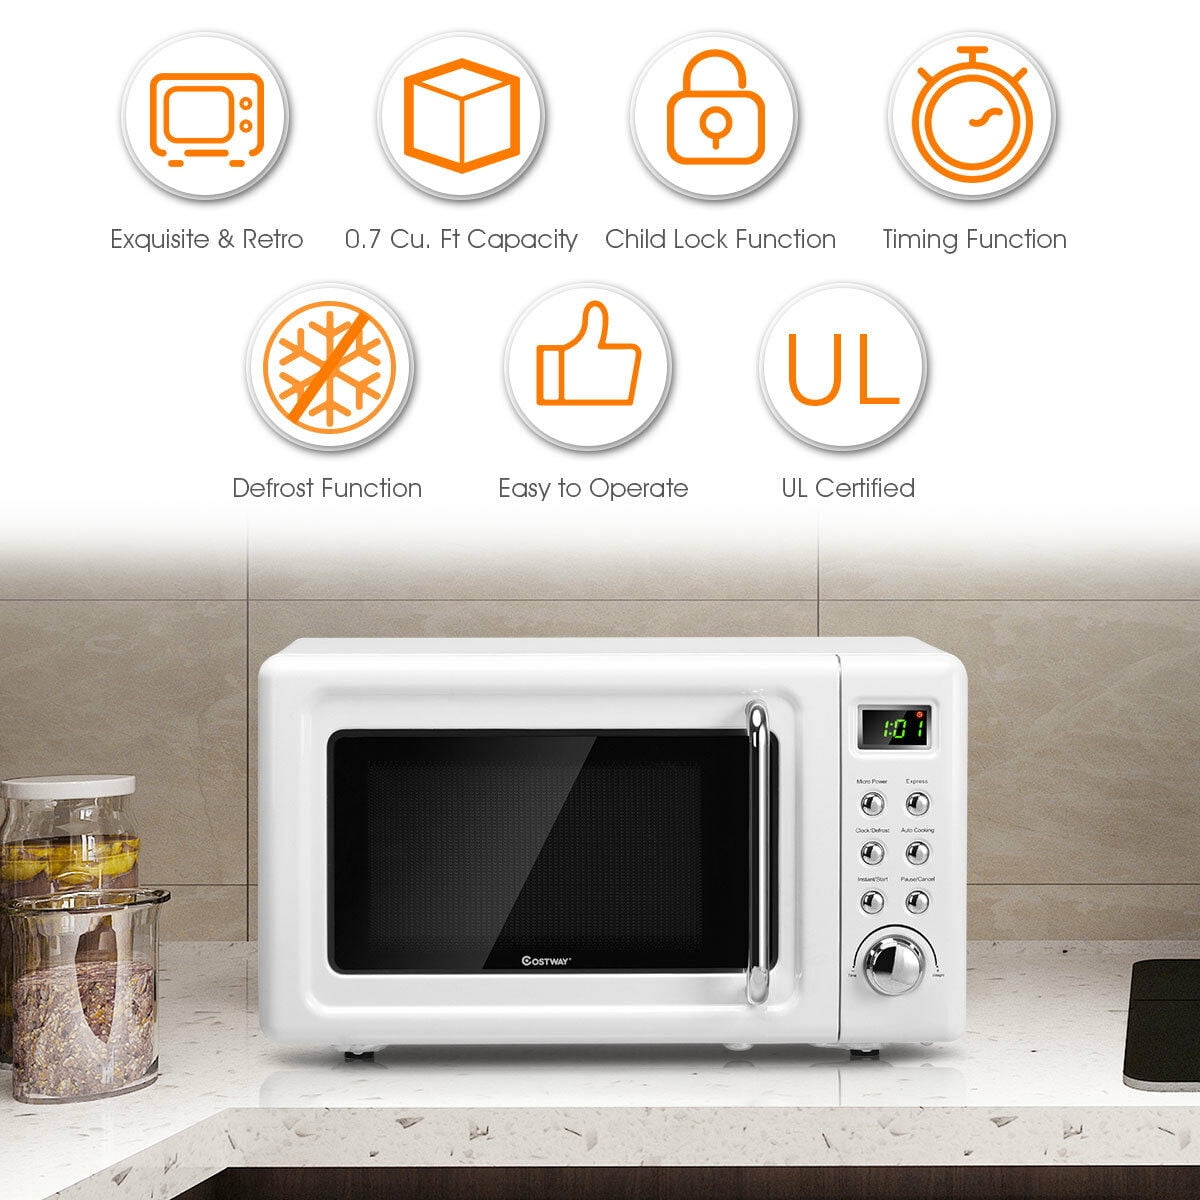 Child Lock with 5 Micro Power Defrost & Auto Cooking Function 900W Microwave Oven LED Display Glass Turntable and Viewing Window COSTWAY Retro Countertop Microwave Oven 0.9Cu.ft 